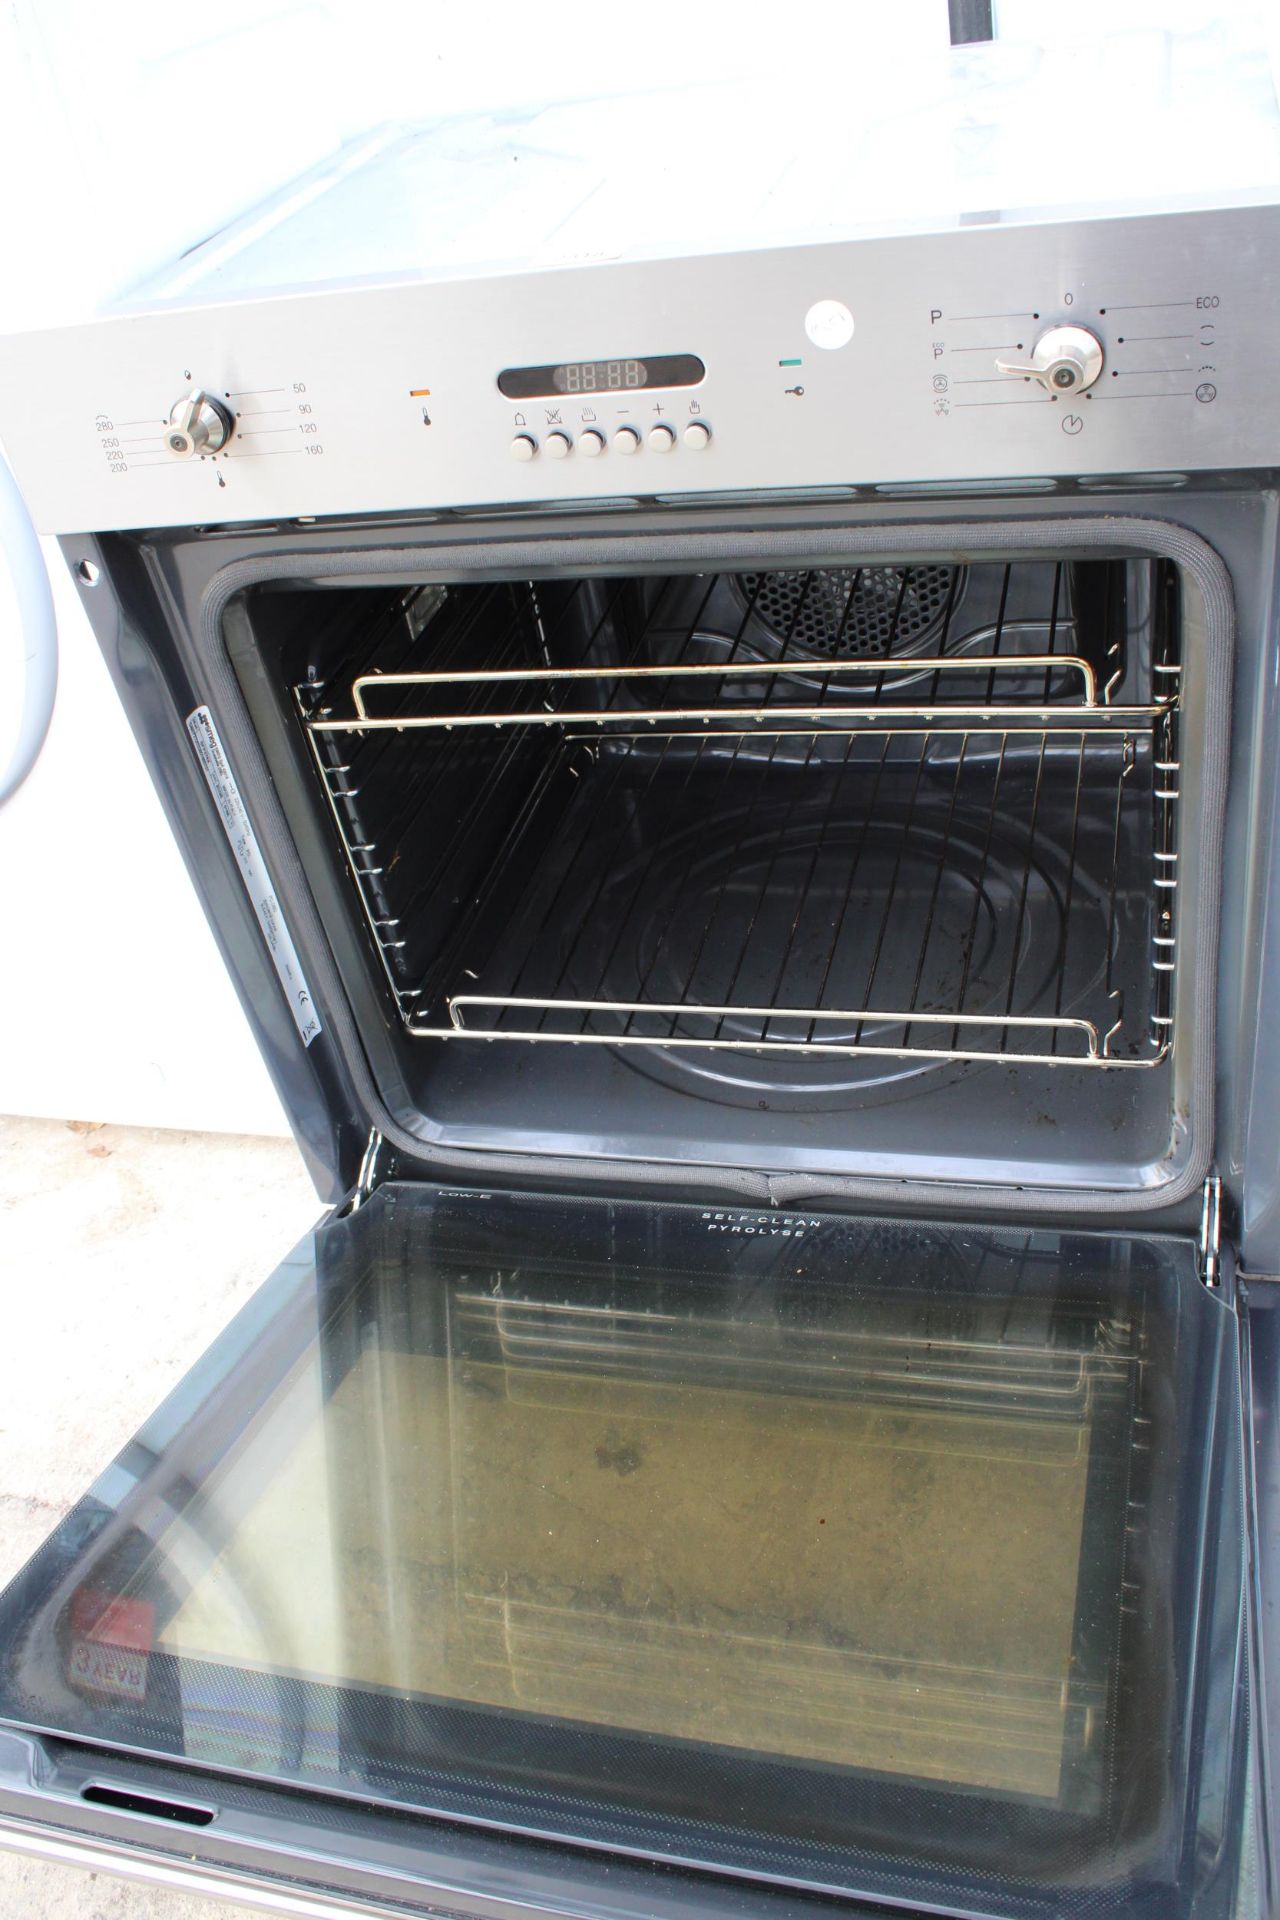 A SILVER SMEG INTERGRATED OVEN - Image 3 of 3